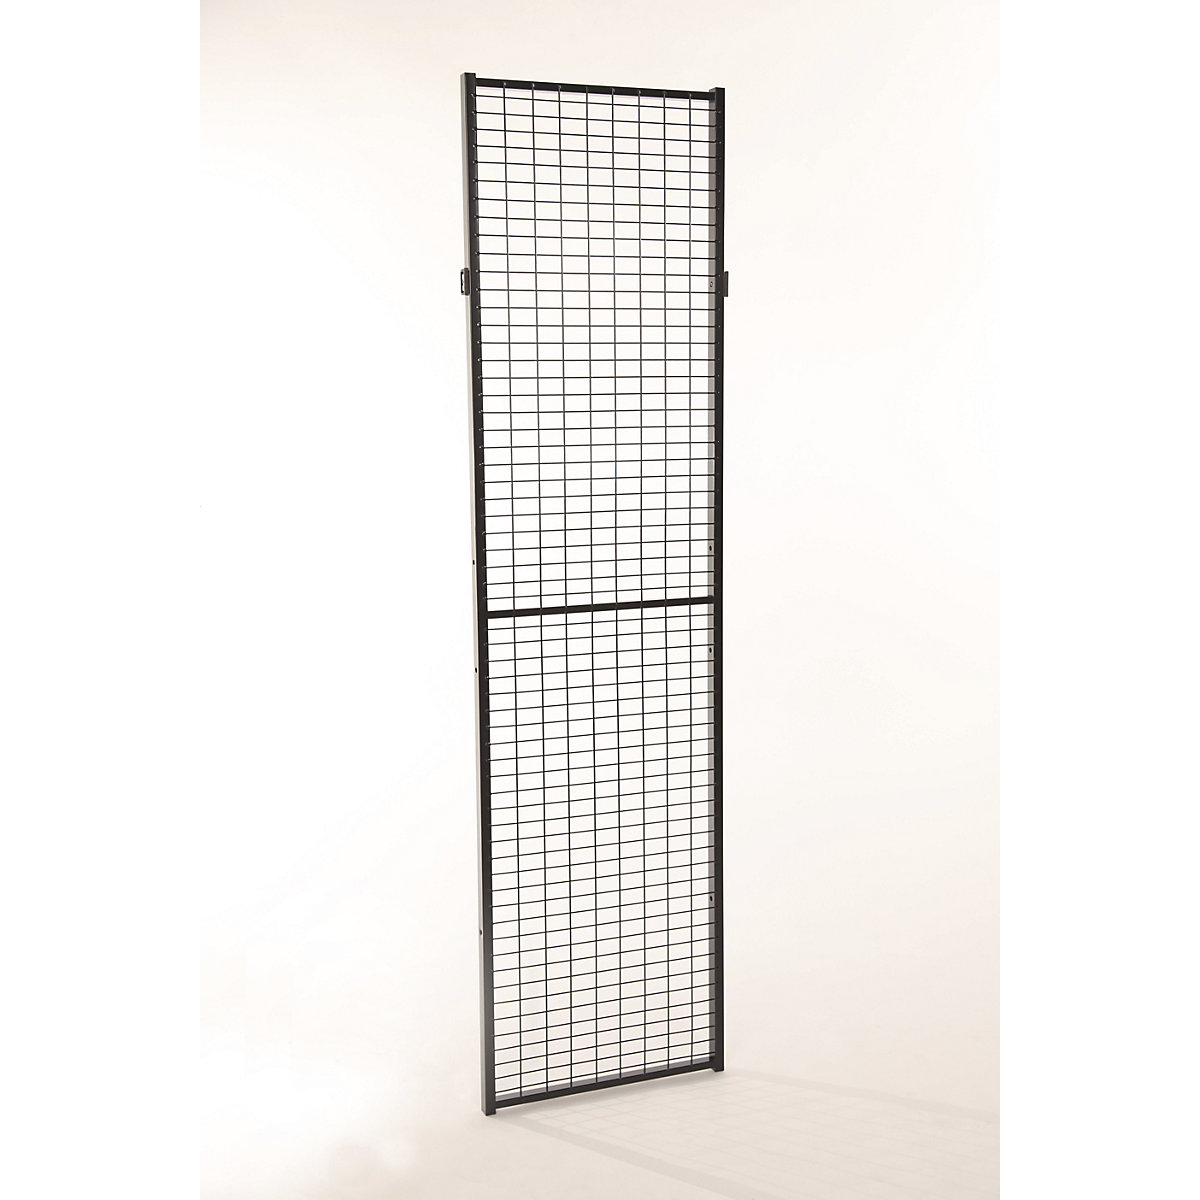 X-GUARD CLASSIC machine protective fencing, wall section – Axelent, height 2200 mm, width 400 mm-8